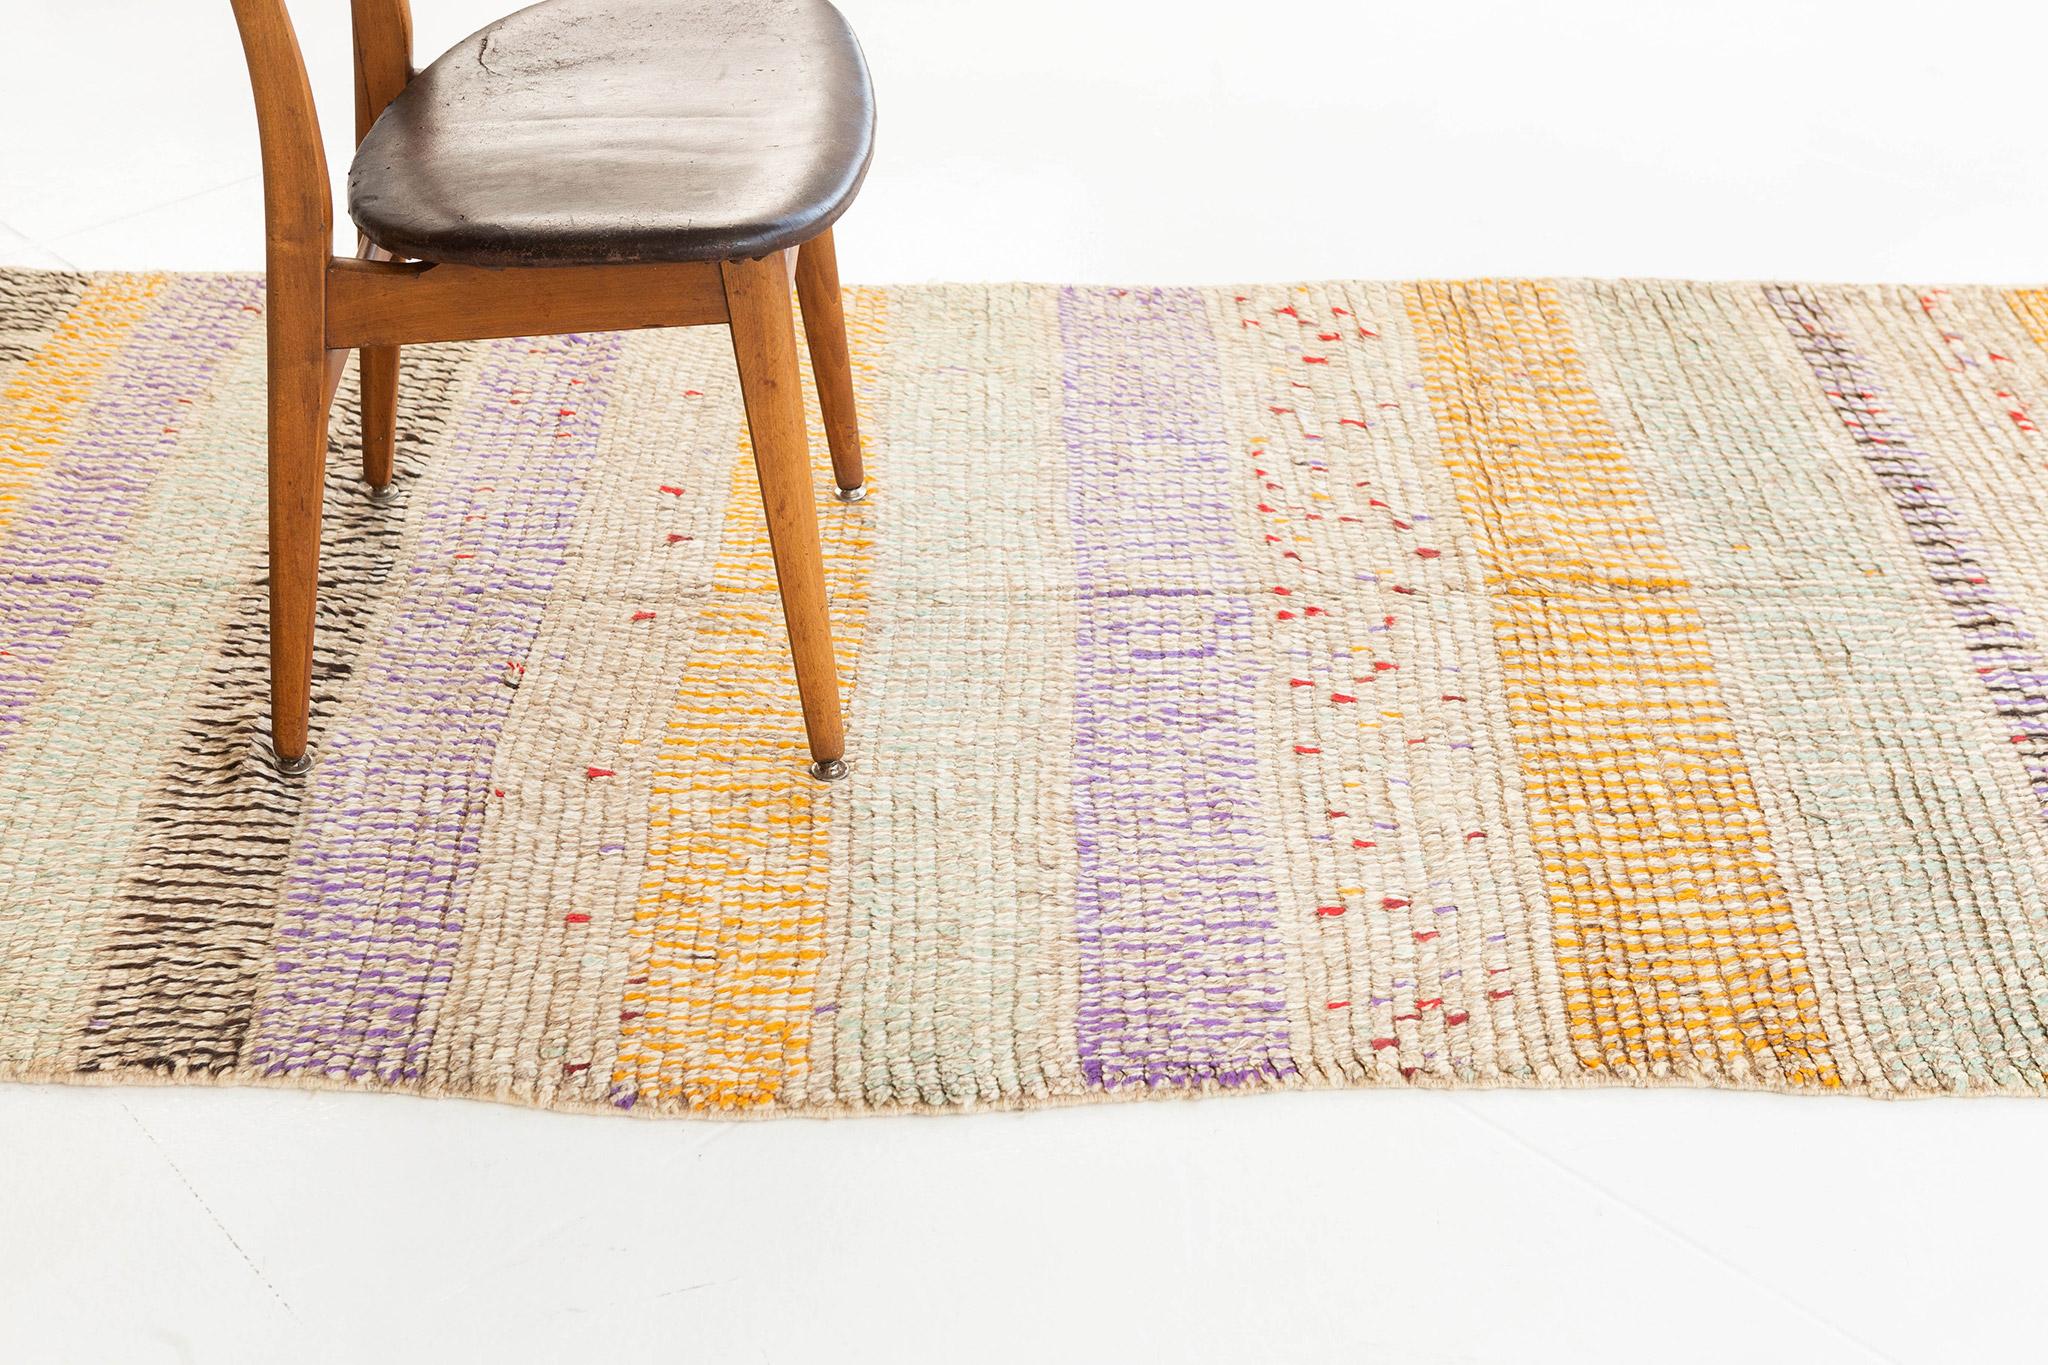 Artful geometric striped rug of mixed wool colorations.  Horizontal bands of impactful purple, aqua, black and golden orange are modified by alternating ivory and taupe knots which occur throughout the whole rug. The overall effect is dappled,